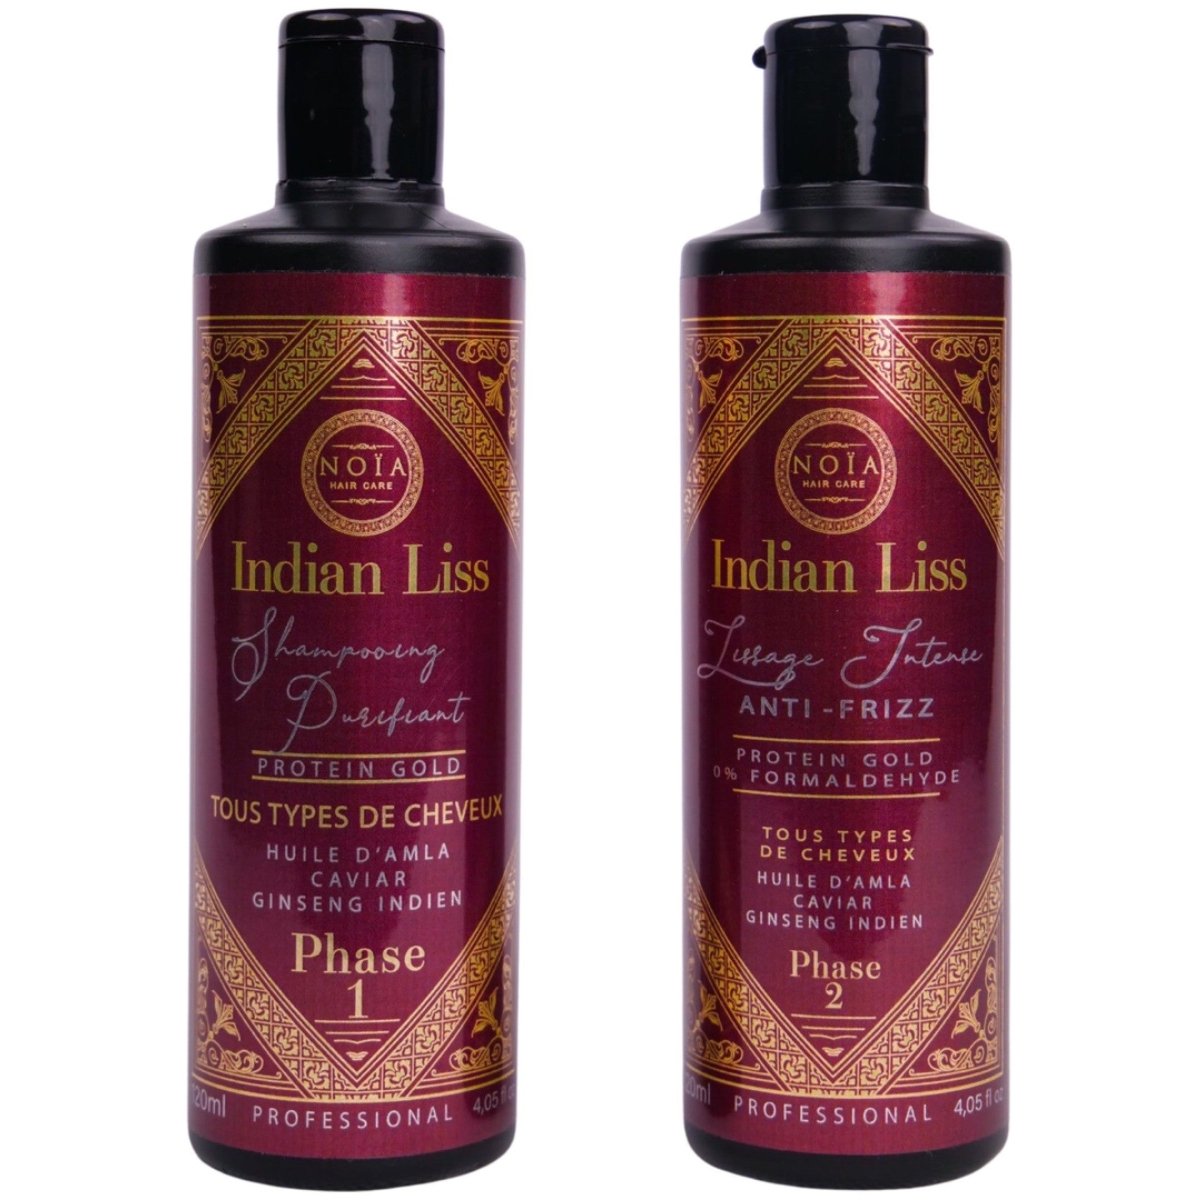 LISSAGE NOIA HAIR - INDIAN LISS -HUILE D'AMLA .CAVIAR & GINSENG INDIEN - PROTEIN GOLD - 2 X200ML - BEAUTEPRICE LISSAGE NOIA HAIR - INDIAN LISS -HUILE D'AMLA .CAVIAR & GINSENG INDIEN - PROTEIN GOLD - 2 X200ML NOÏA HAIR BEAUTEPRICE